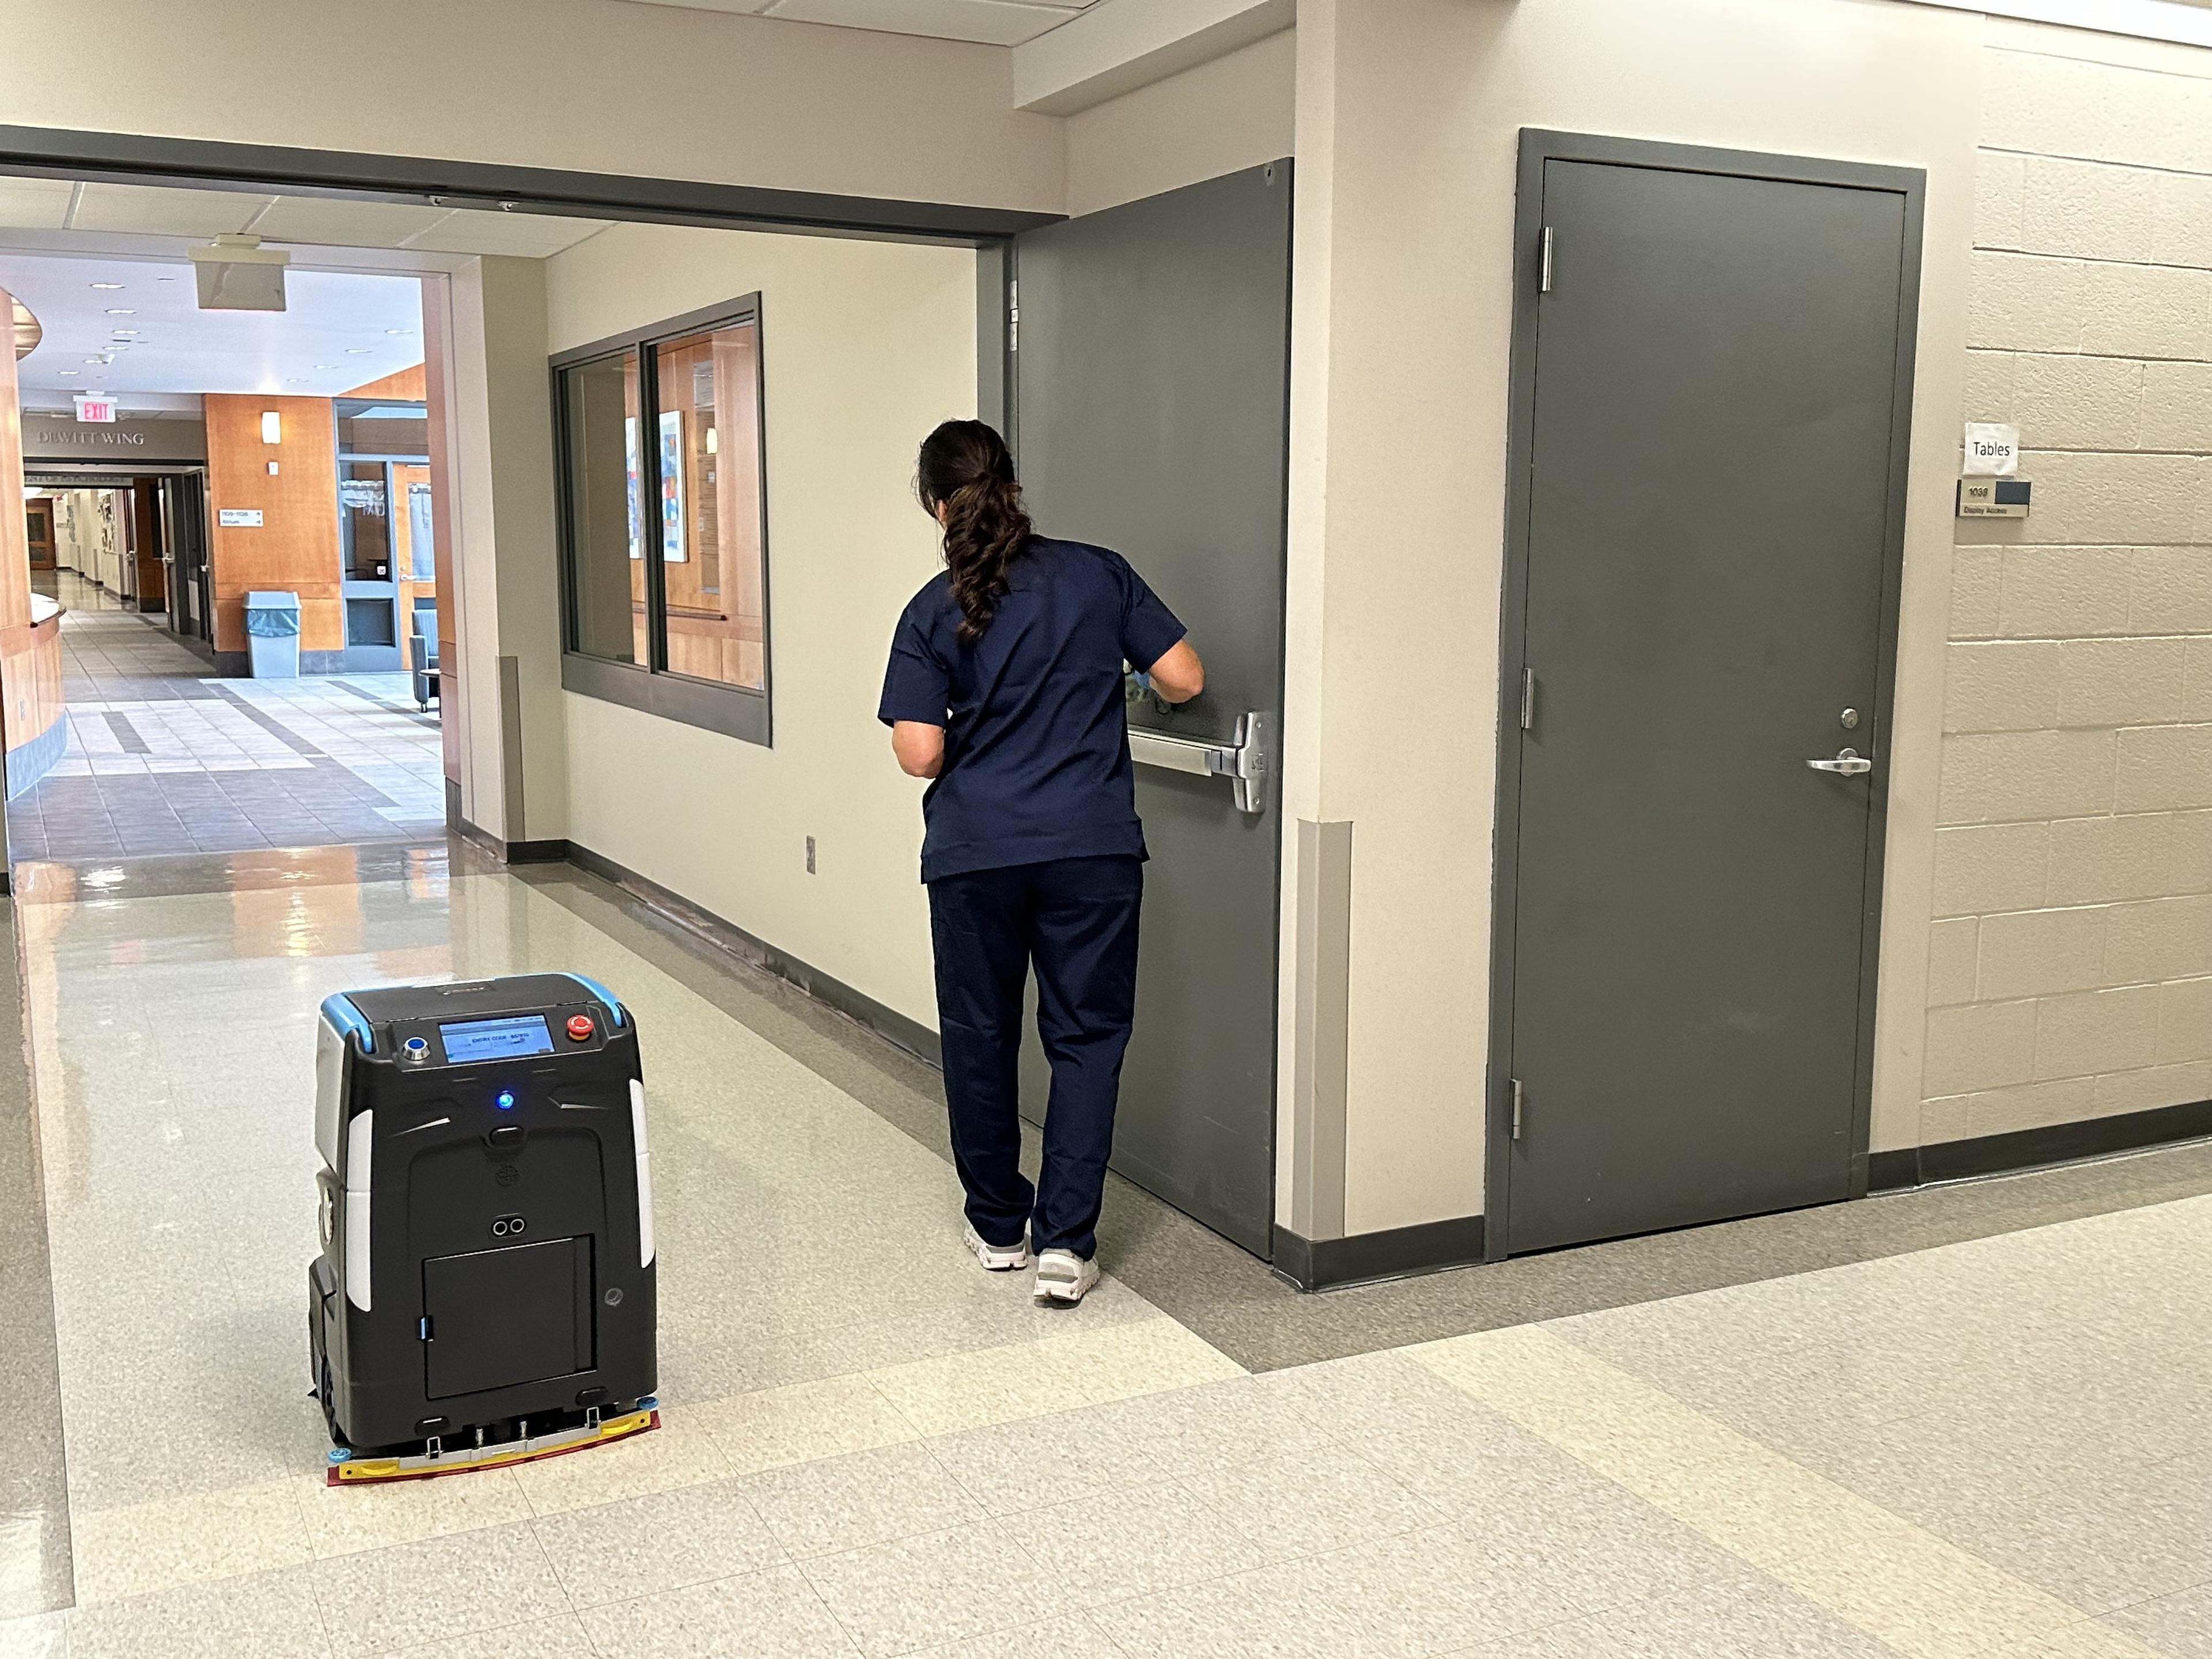 Cobi cleaning healthcare facility